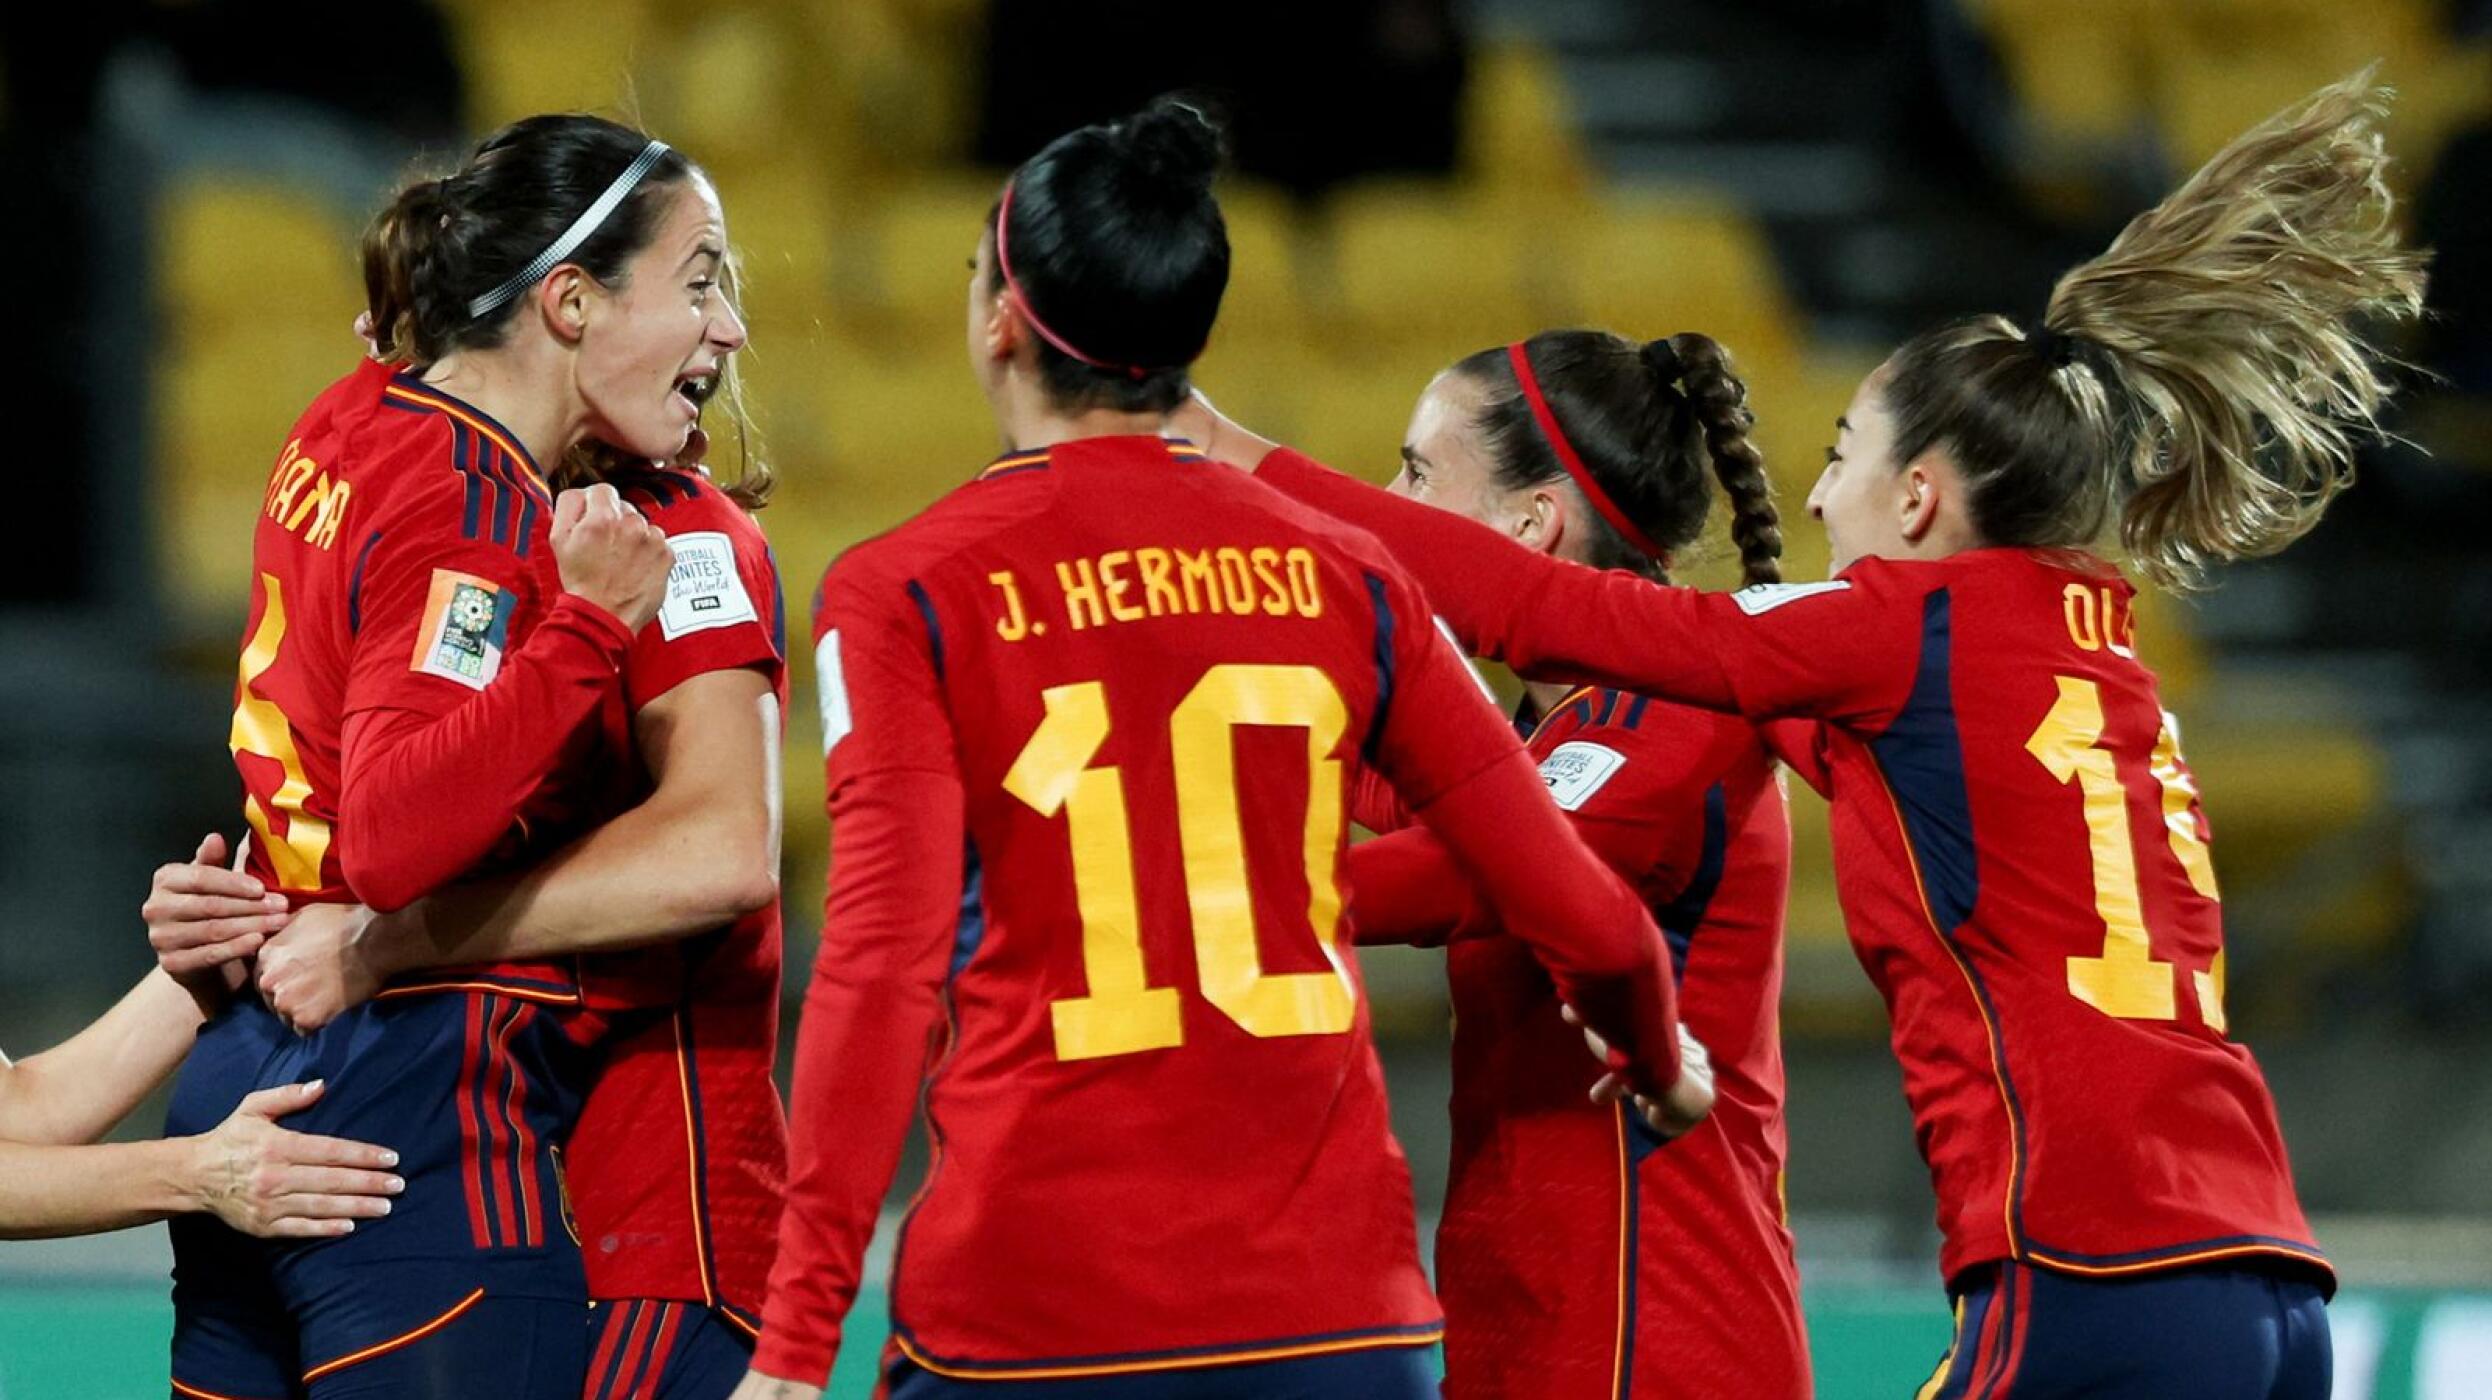 Spain's midfielder Aitana Bonmati celebrates after scoring the team's second goal against Costa Rica during their 2023 Women's World Cup Group C football match at Wellington Stadium